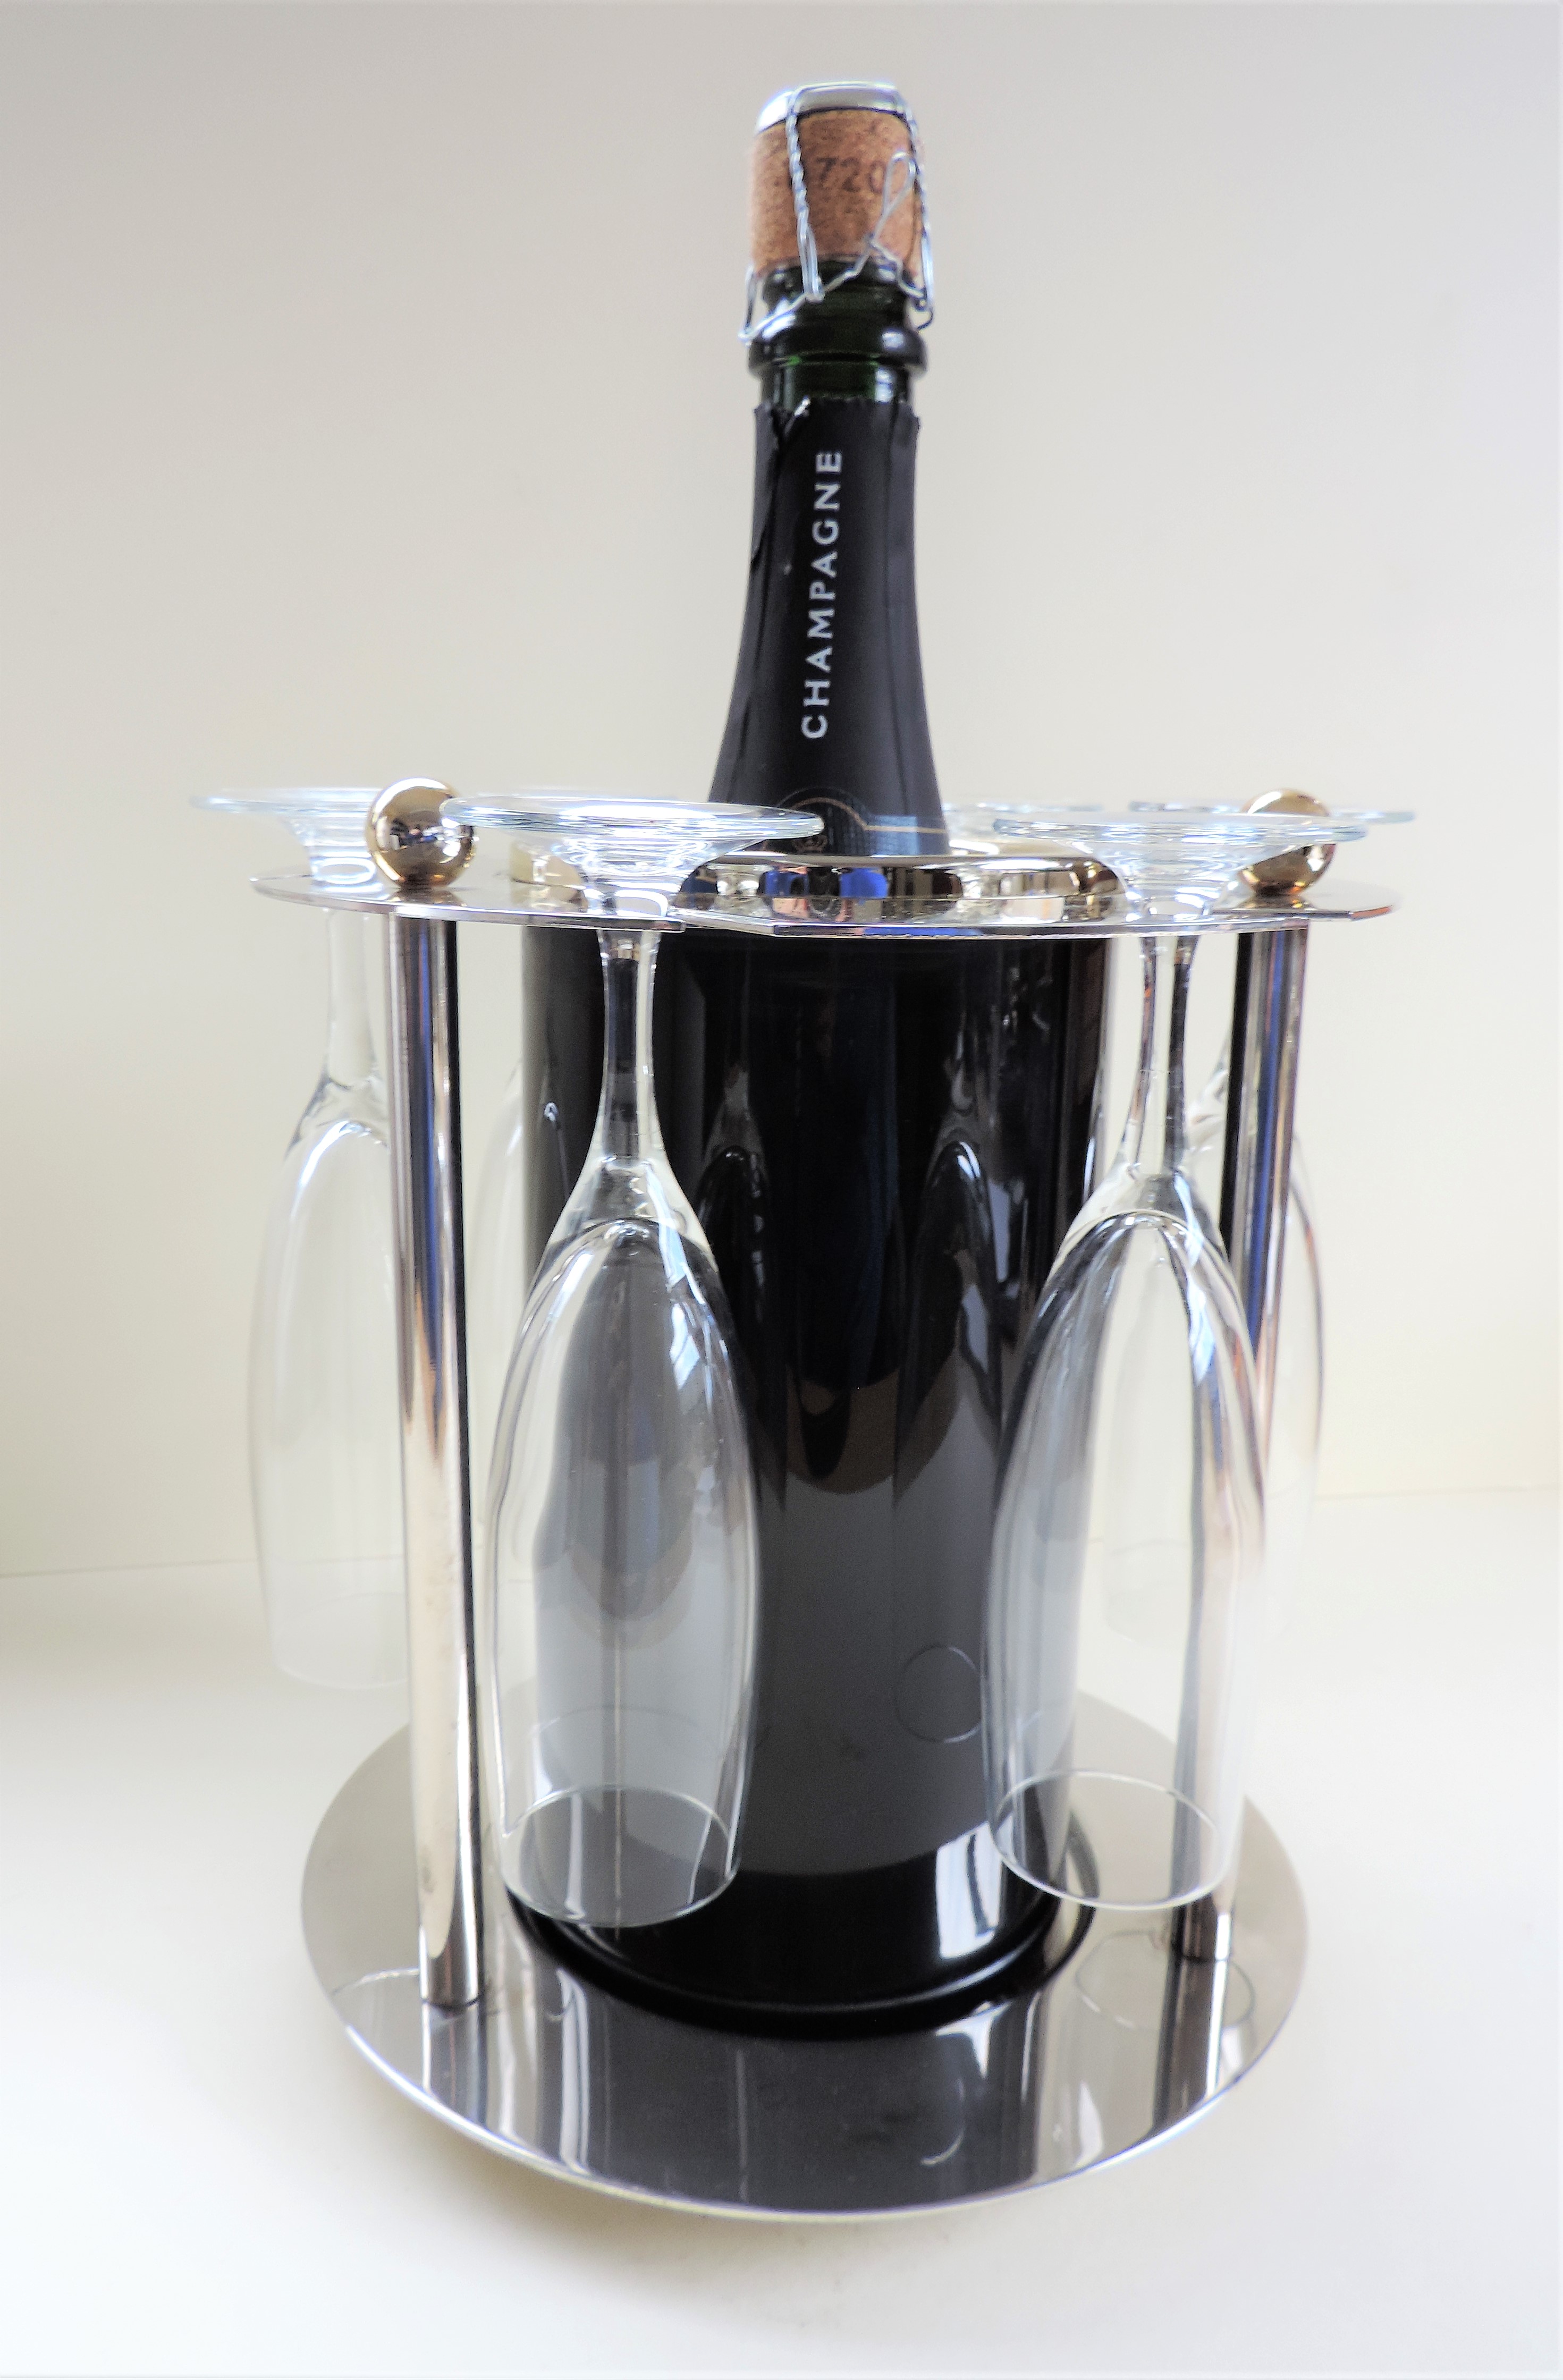 Novelty French Modernist Champagne Cooler, circa 1970's - Image 9 of 11